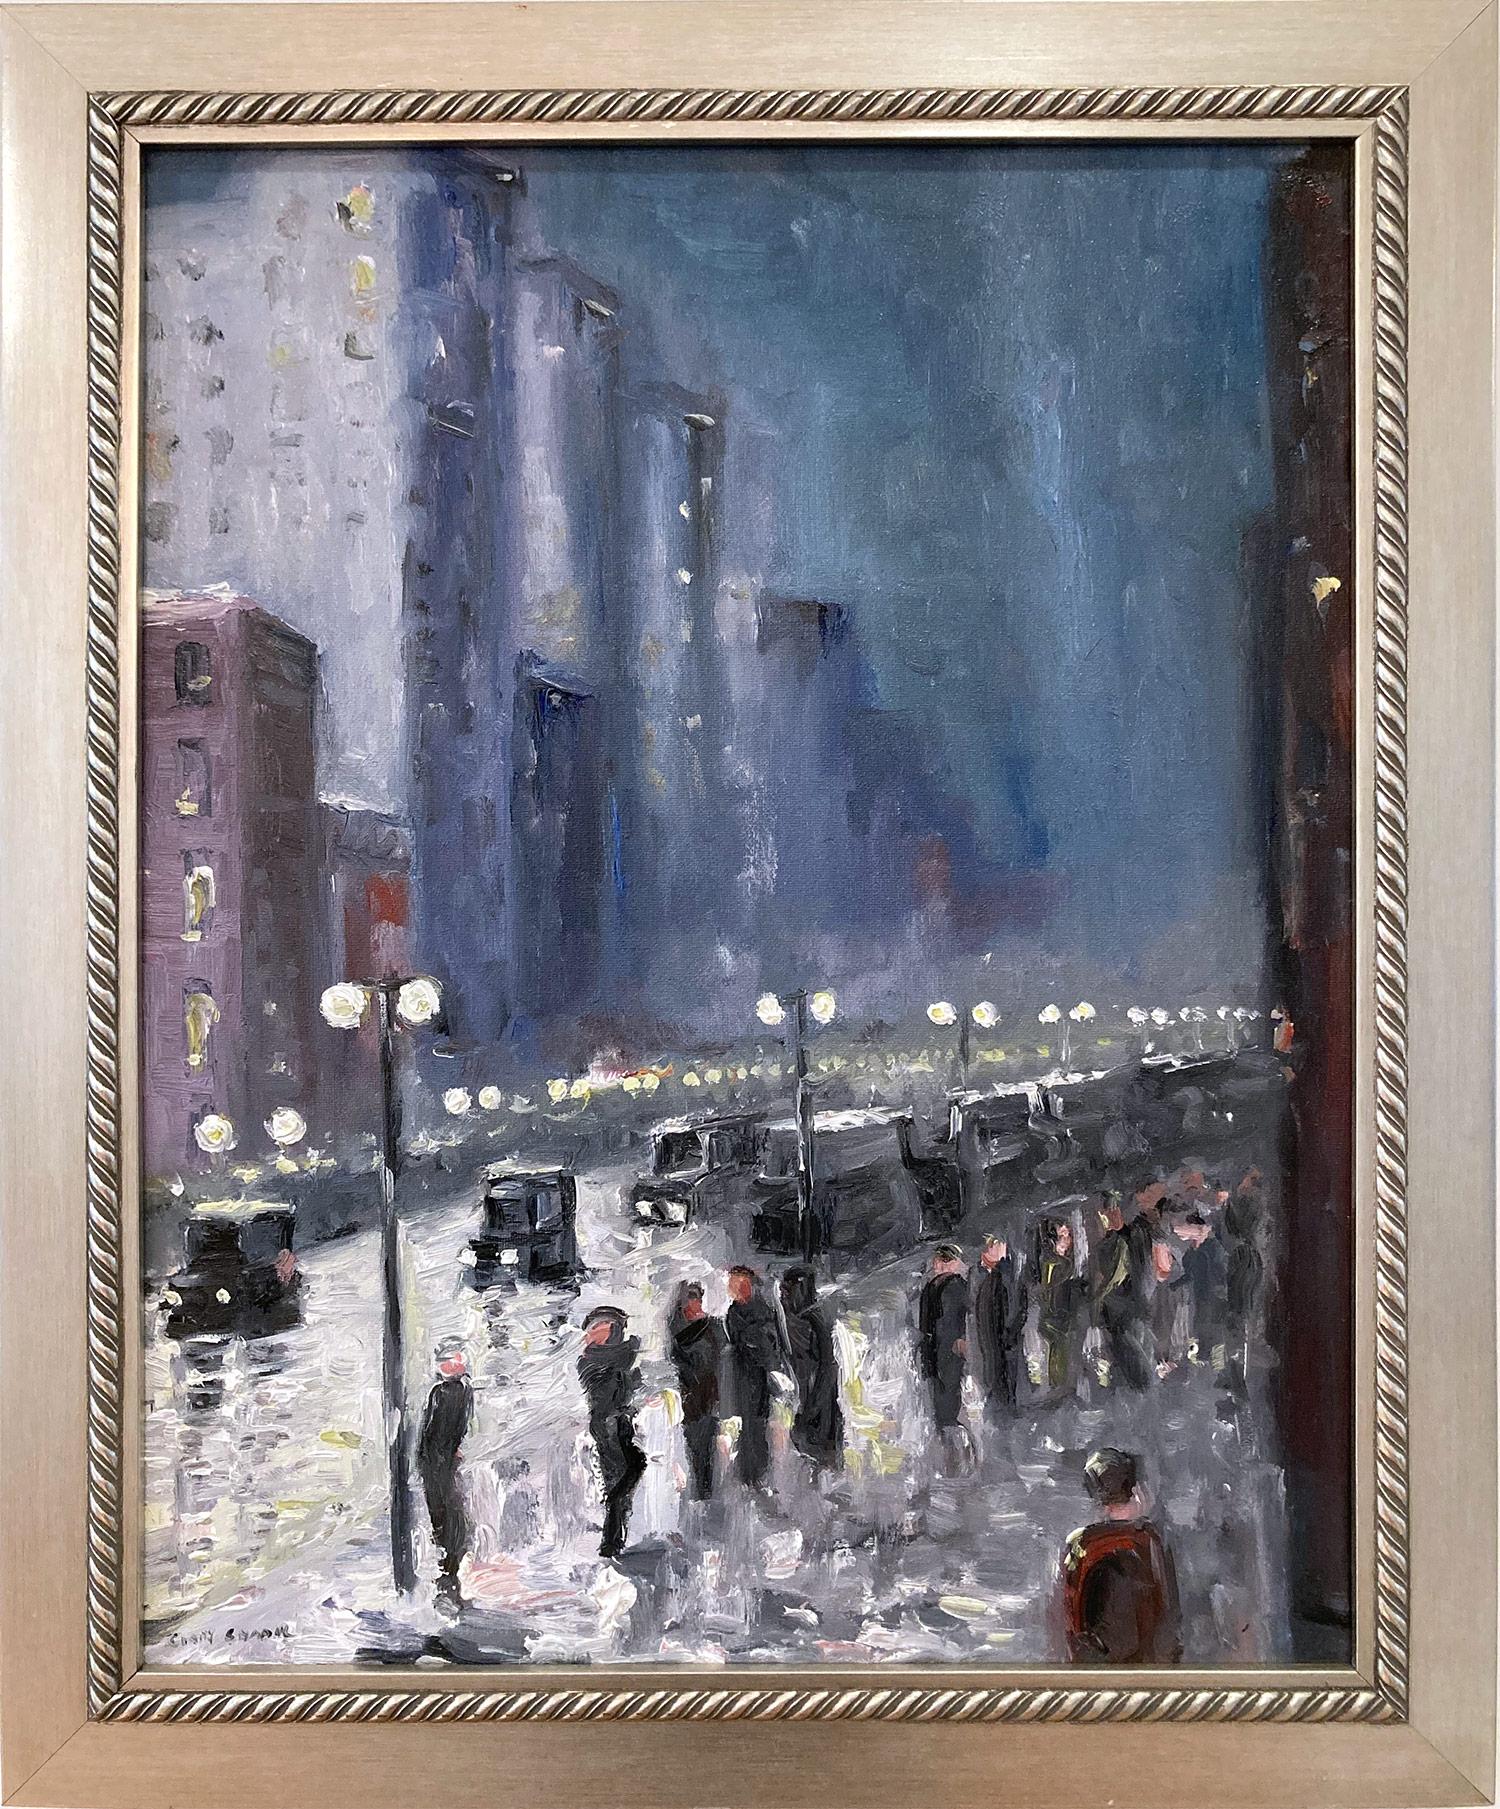 Cindy Shaoul Landscape Painting - "The City At Night" Impressionist Nocturnal Street Scene Oil Painting on Canvas